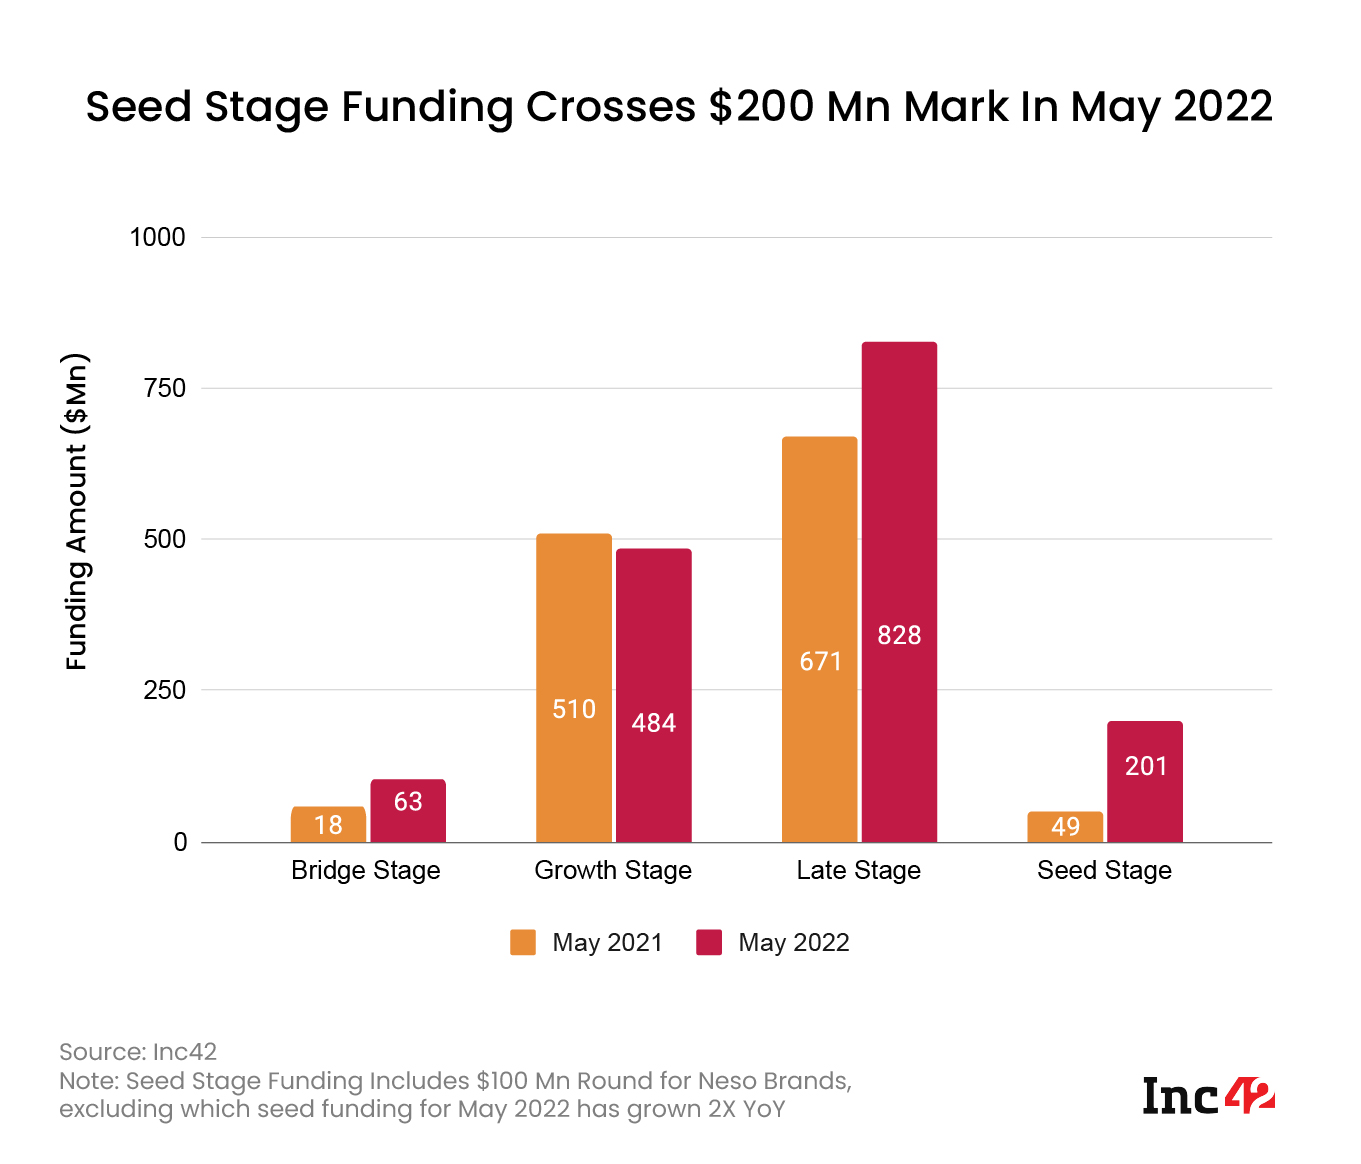 Seed Stage Funding Crosses $200 Mn Mark in May 2022